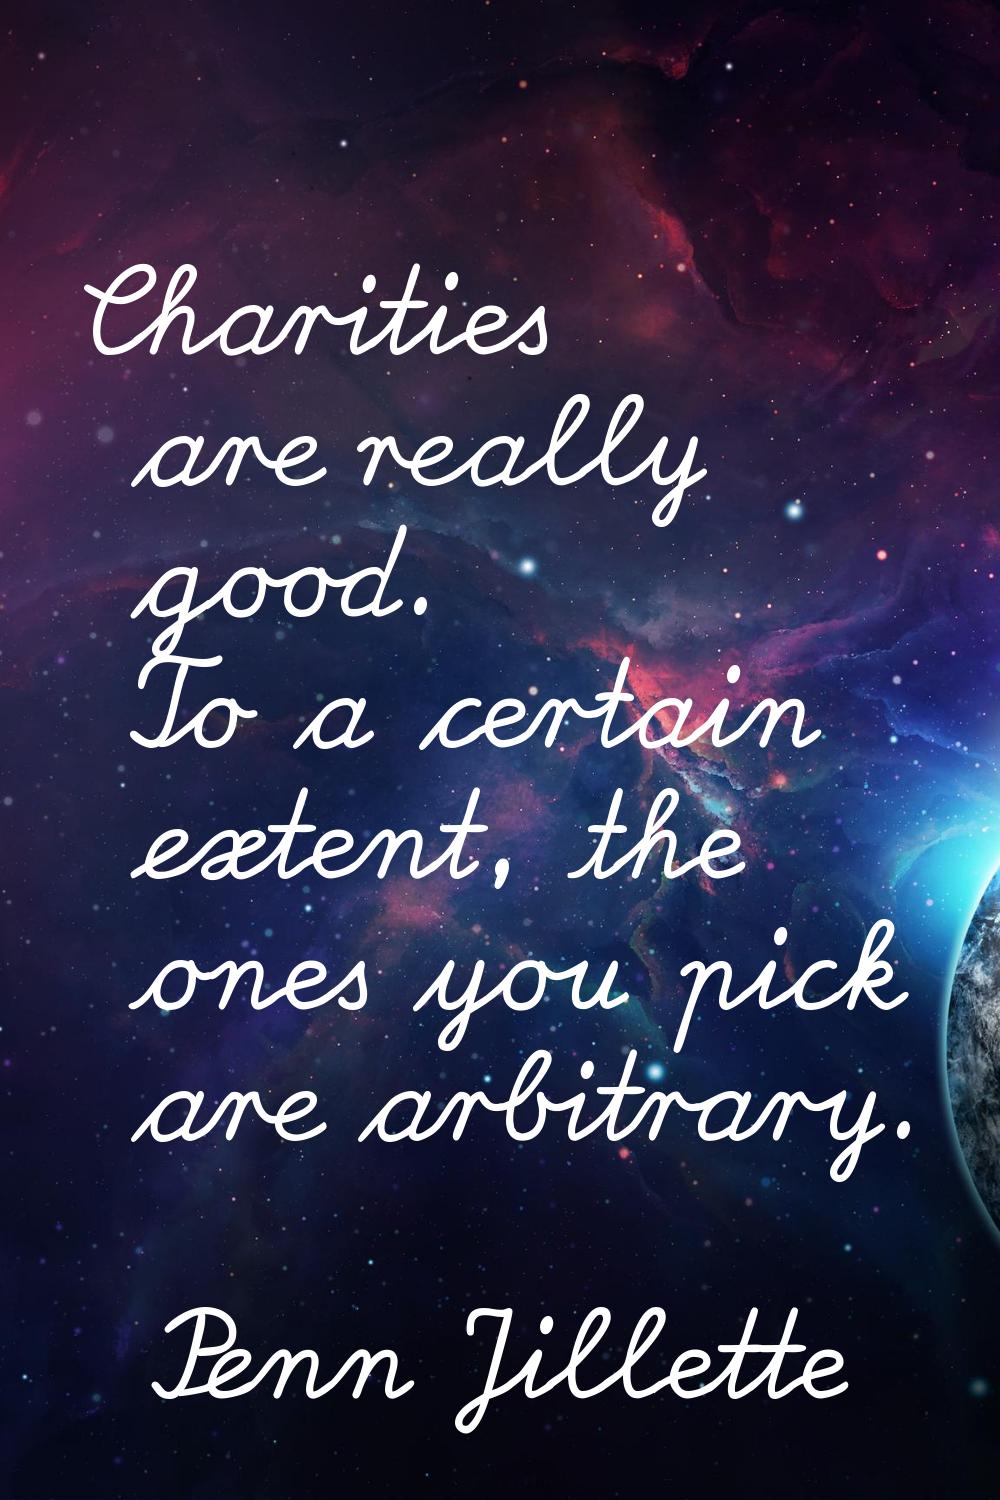 Charities are really good. To a certain extent, the ones you pick are arbitrary.